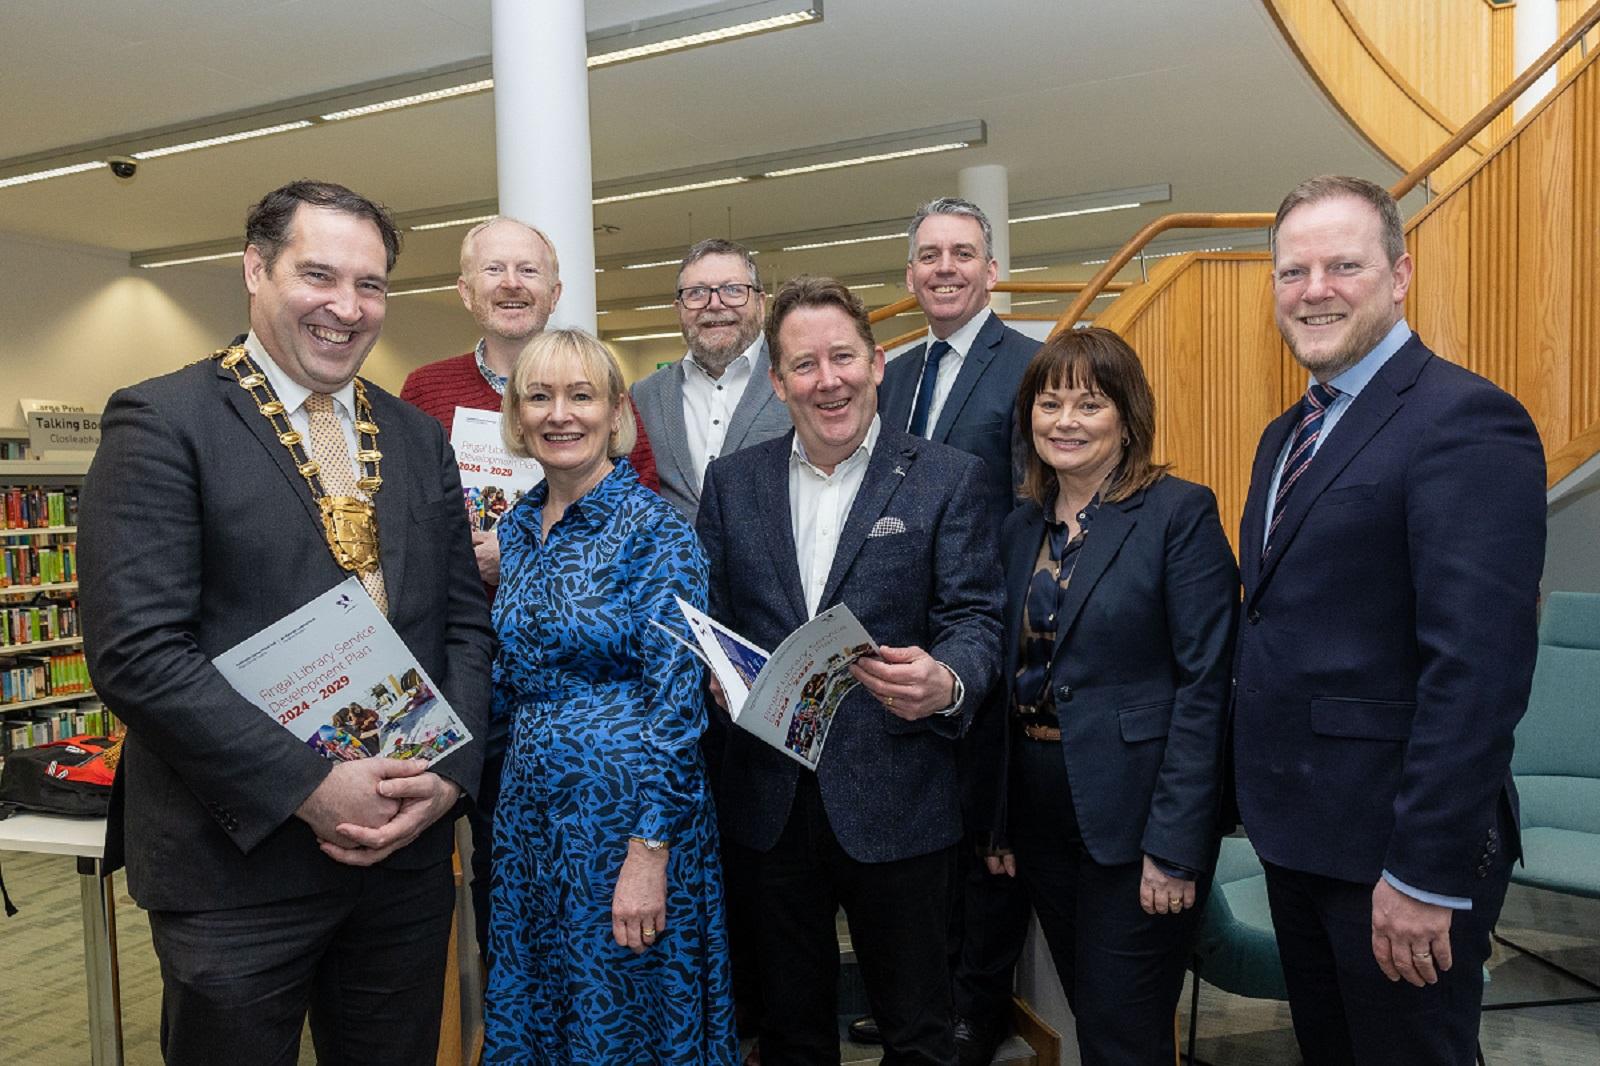 A new 5 year plan for Fingal Libraries was launched in Malahide